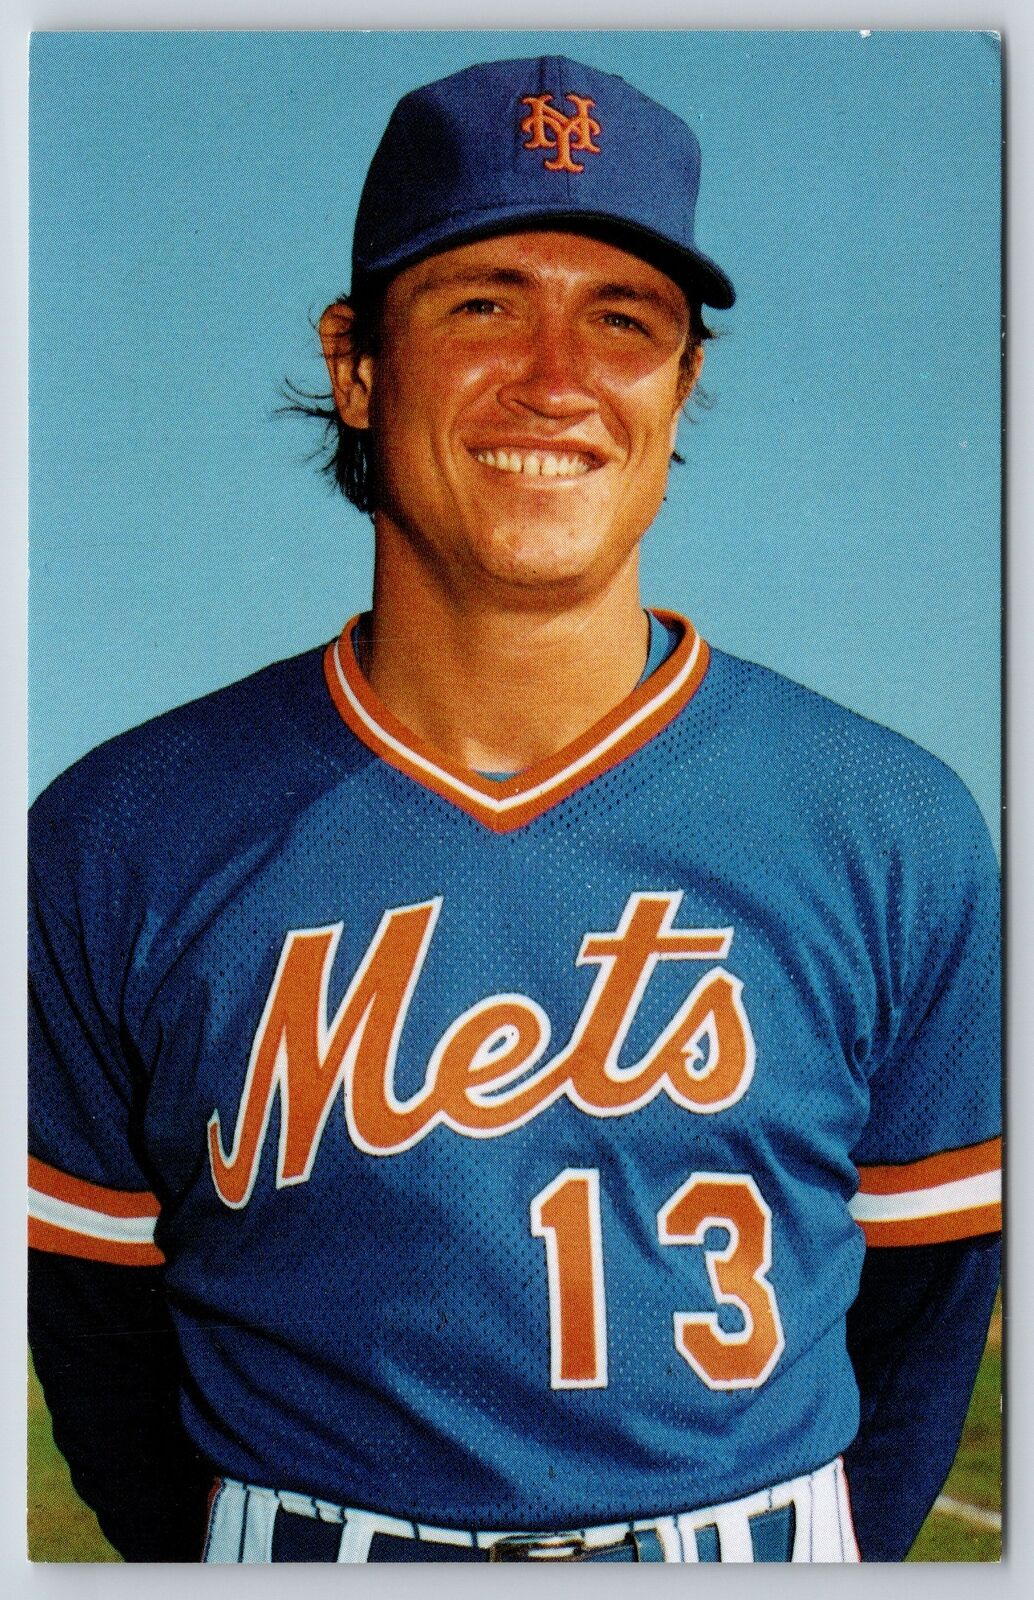 Sports~Infielder Clint Hurdle Of The New York Mets Baseball Team~Vintage PC